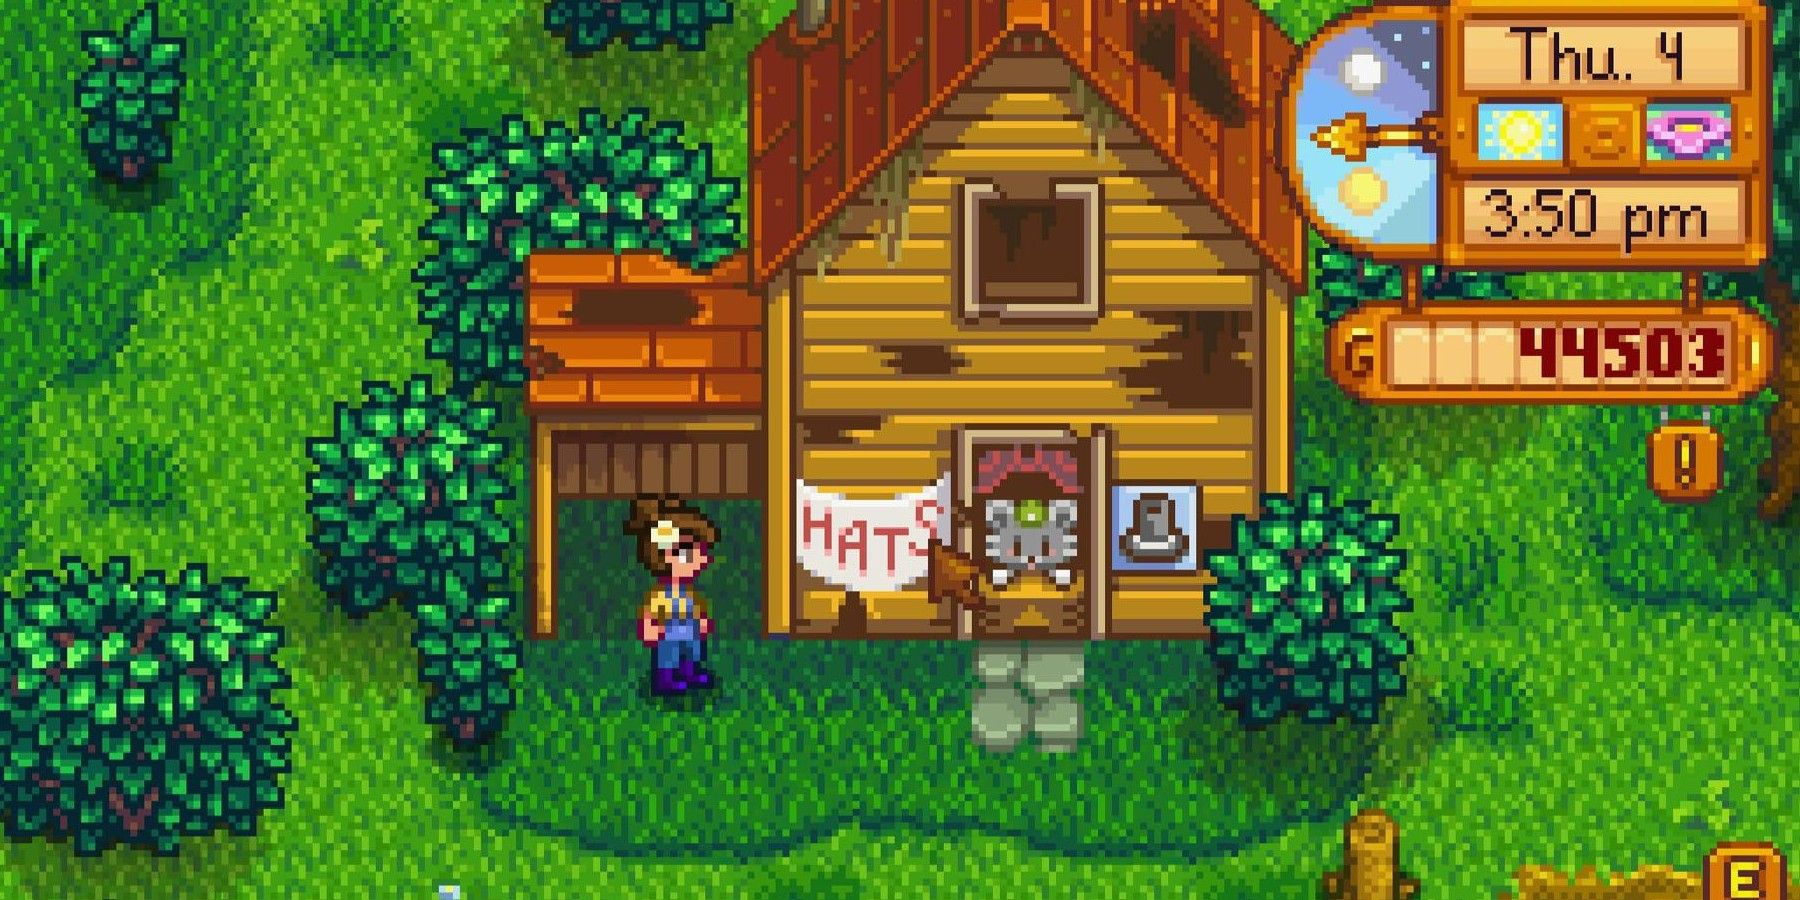 stardew-valley-hat-mouse